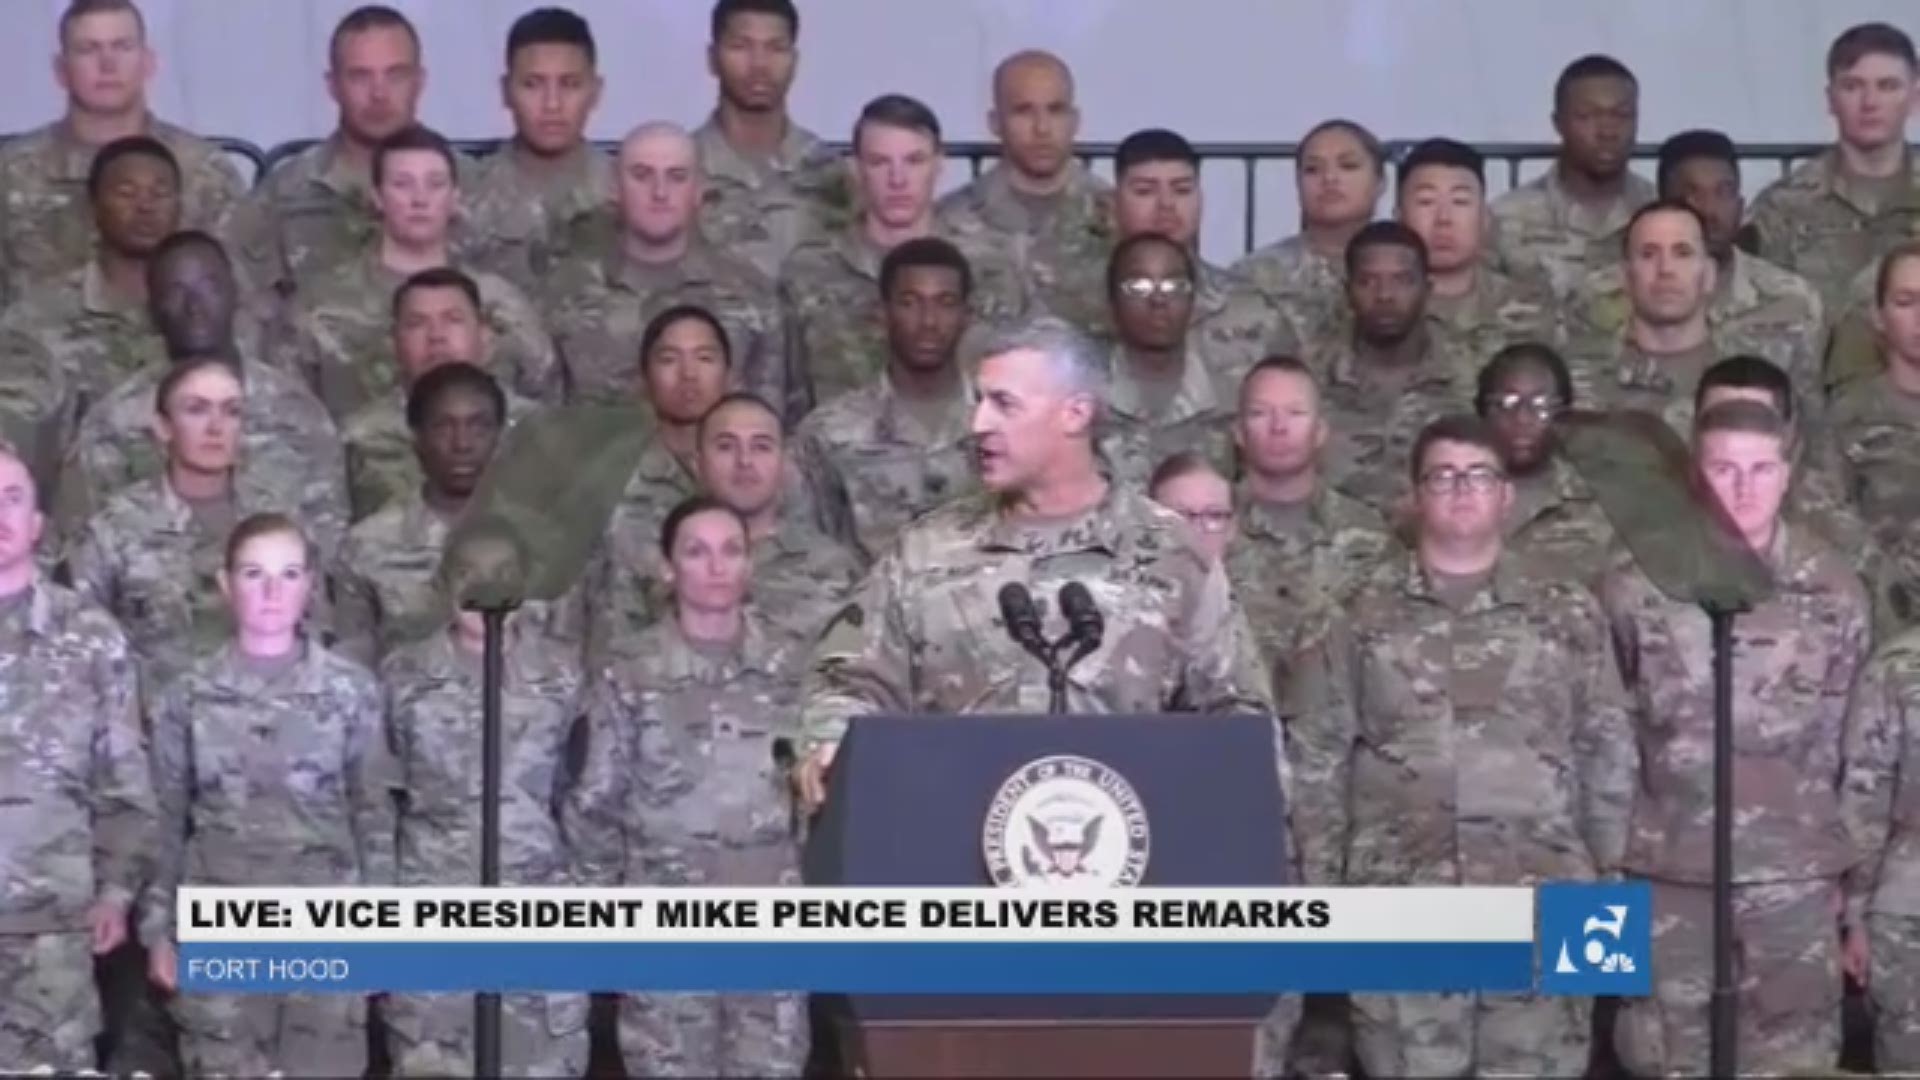 VP Mike Pence visited Fort Hood to observe a training exercise, participate in a veteran transition roundtable, and speak to soldiers, personnel.